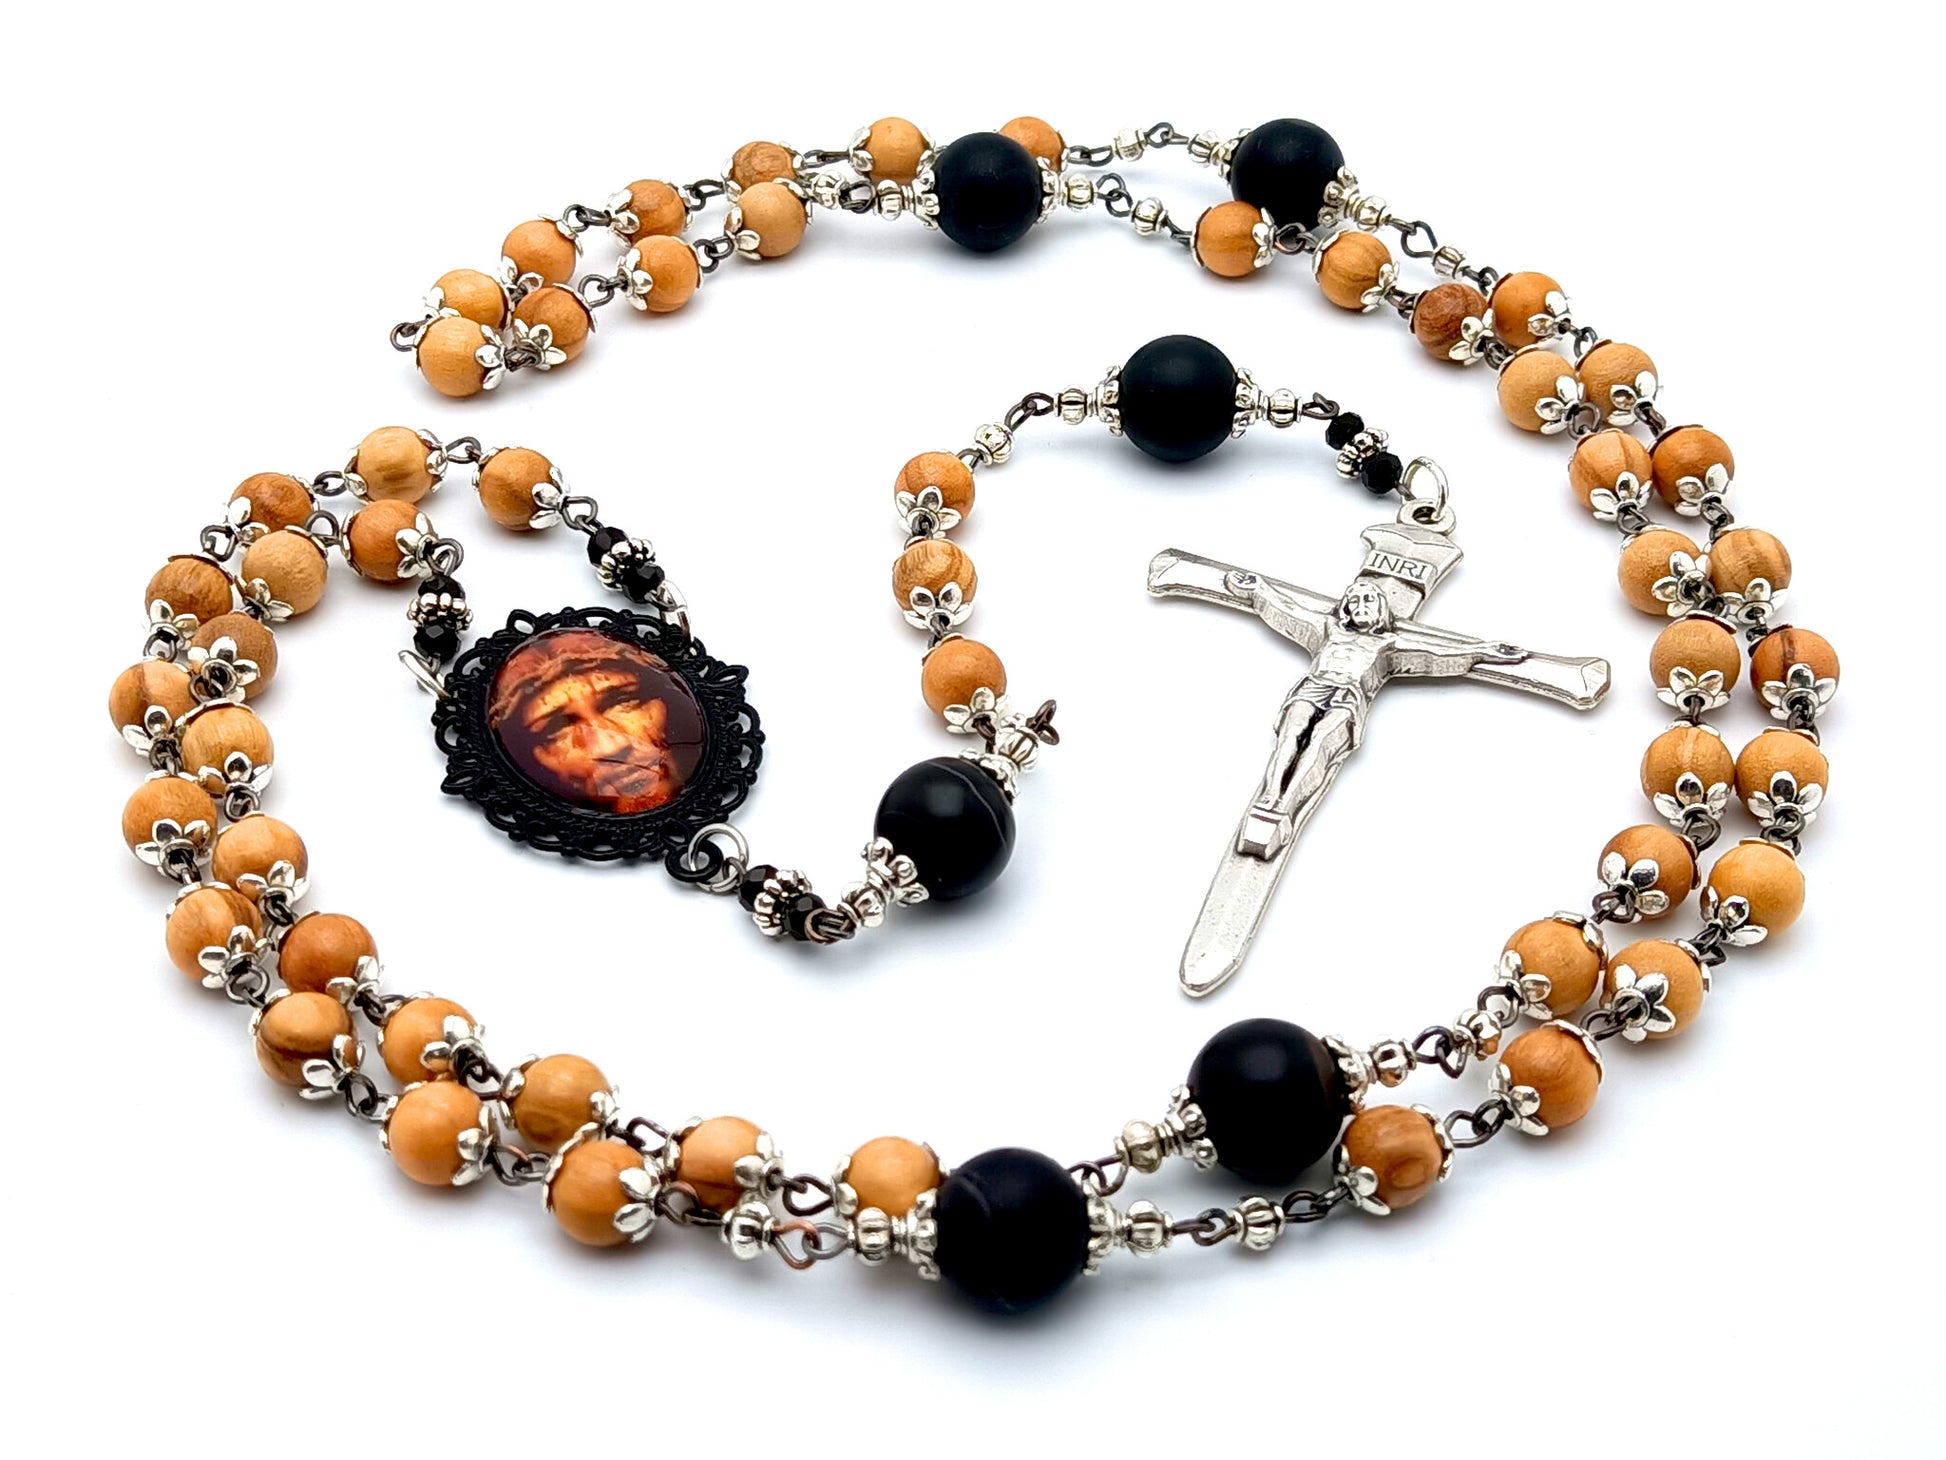 colored beads for jesus